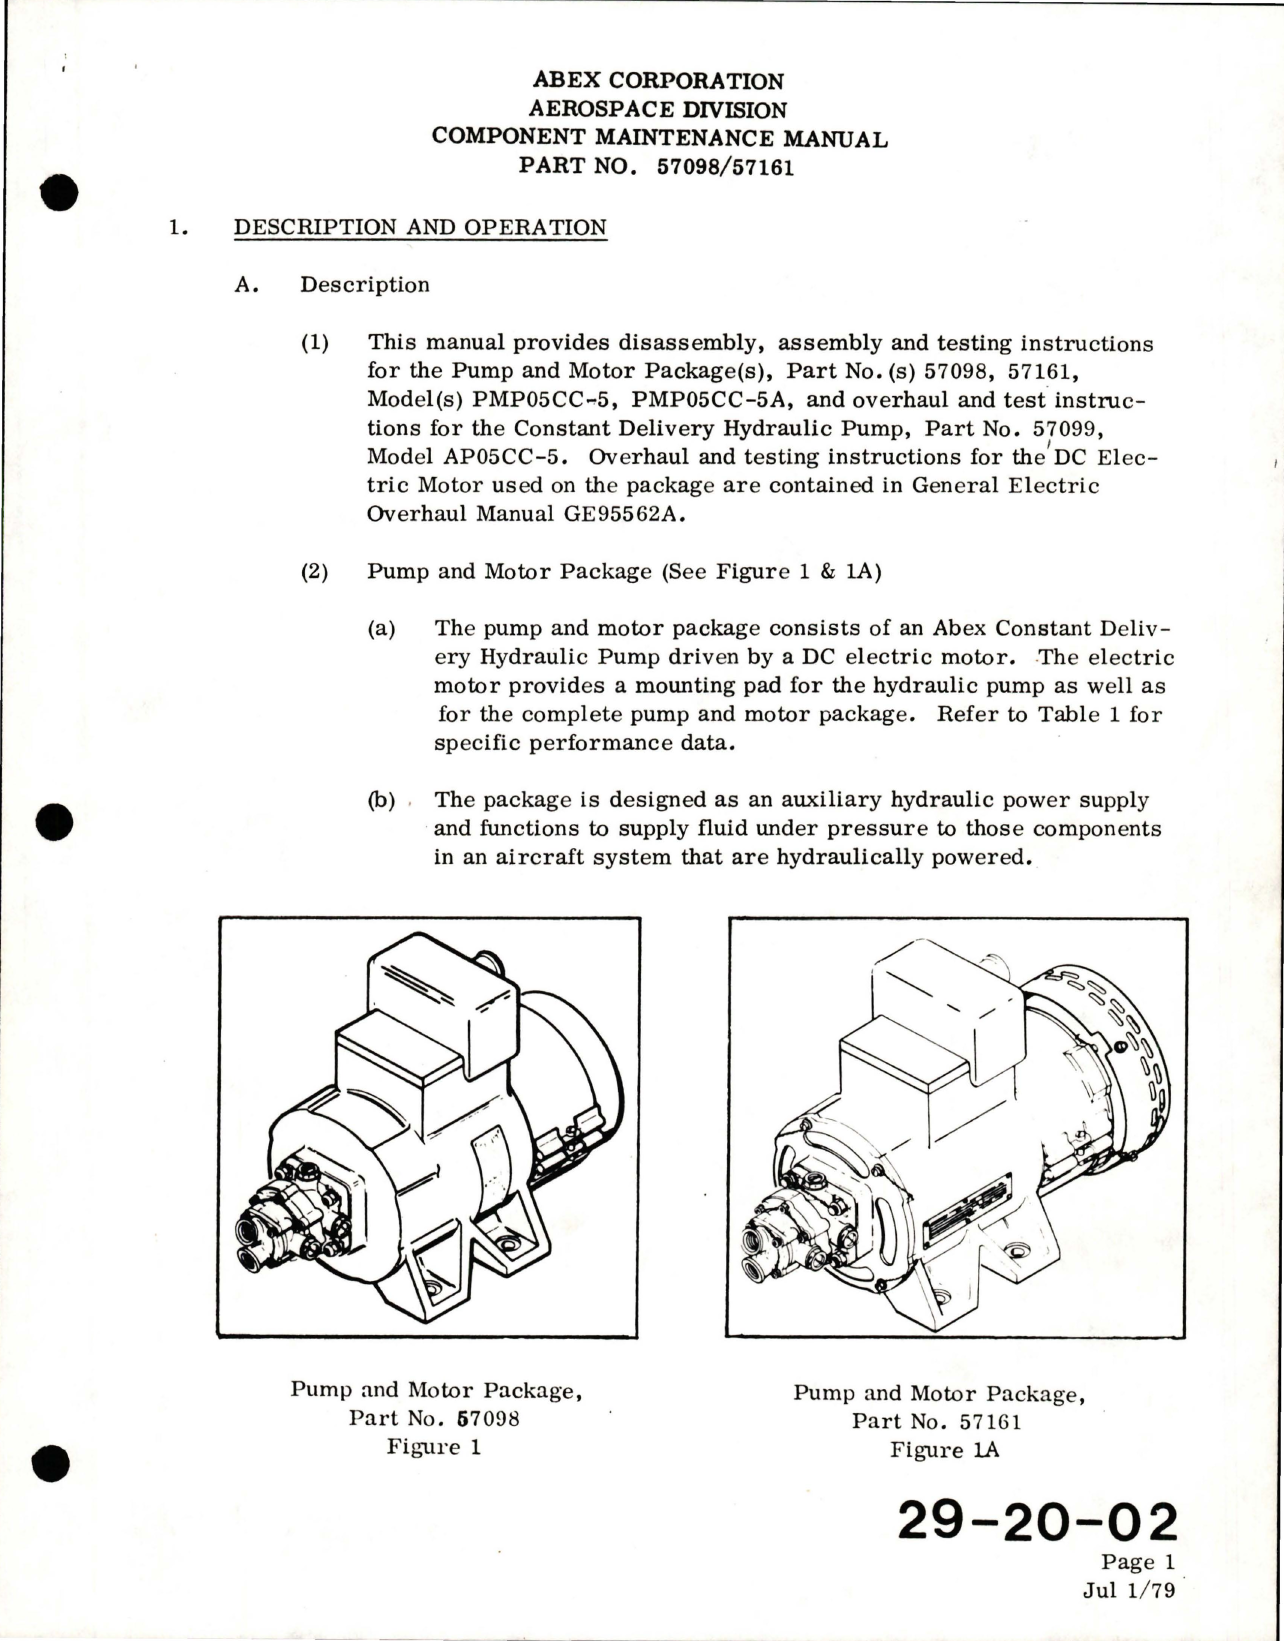 Sample page 9 from AirCorps Library document: Maintenance Manual with Illustrated Parts List for Pump and Motor Package - Parts 57098, 57161 